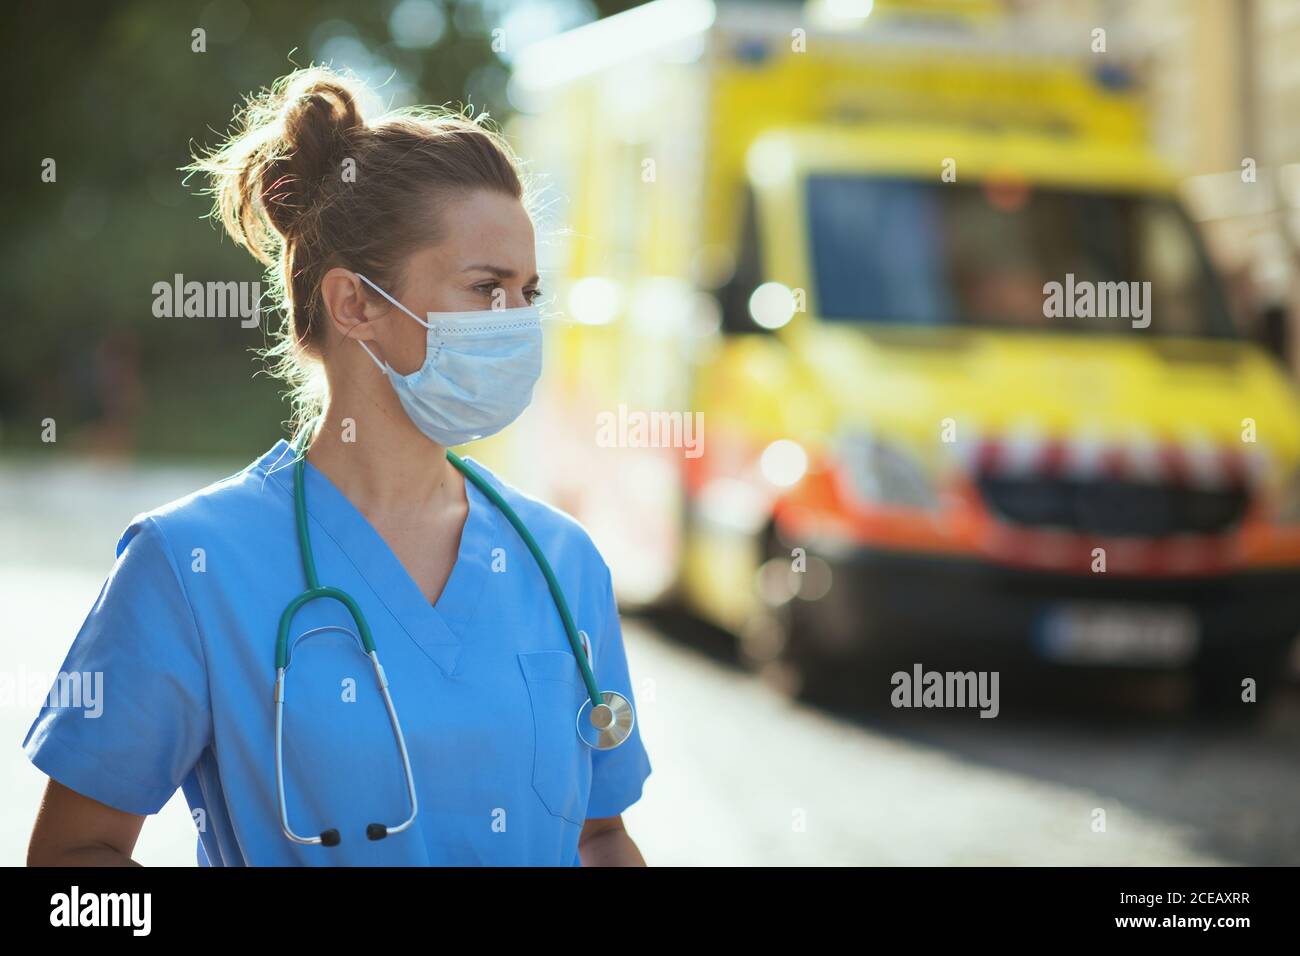 covid-19 pandemic. pensive modern medical doctor woman in uniform with stethoscope and medical mask outside near ambulance. Stock Photo